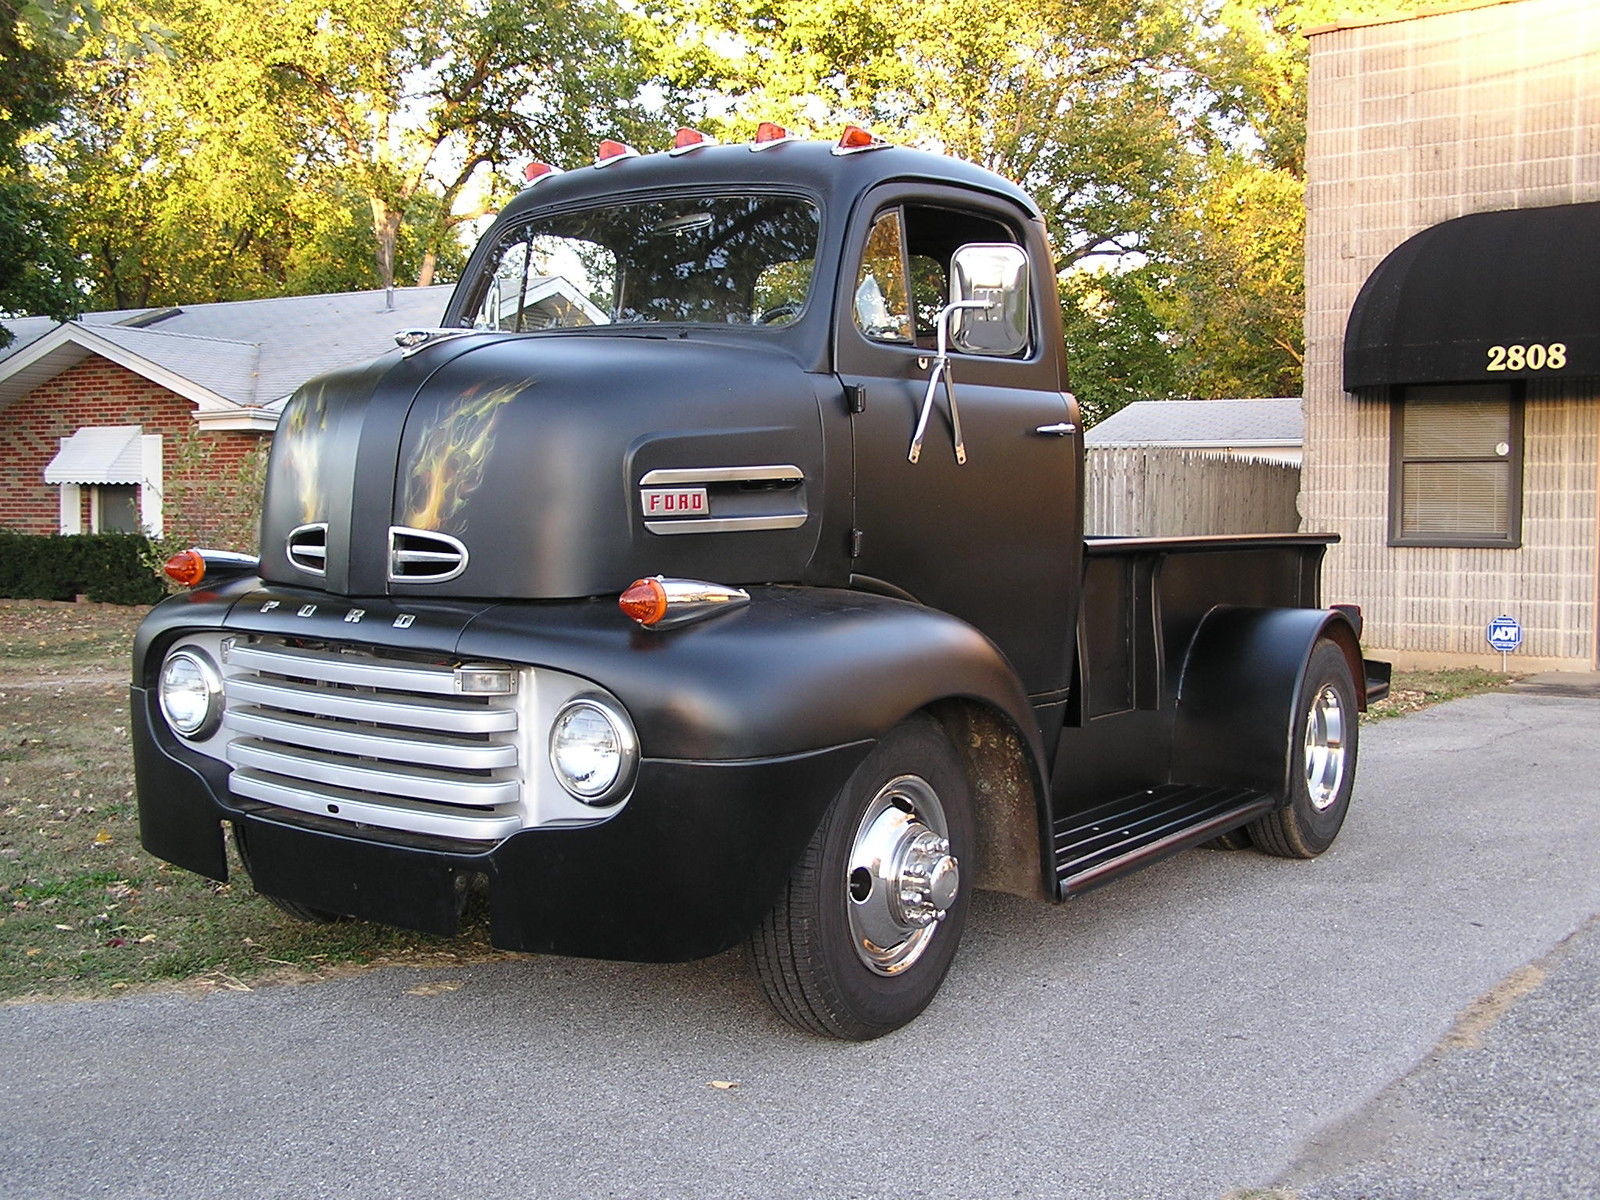 www.paulmartinsmith.com Be Cooler Than Anyone Else At Home Depot In This 1948 COE Ford Pickup - www.paulmartinsmith.com